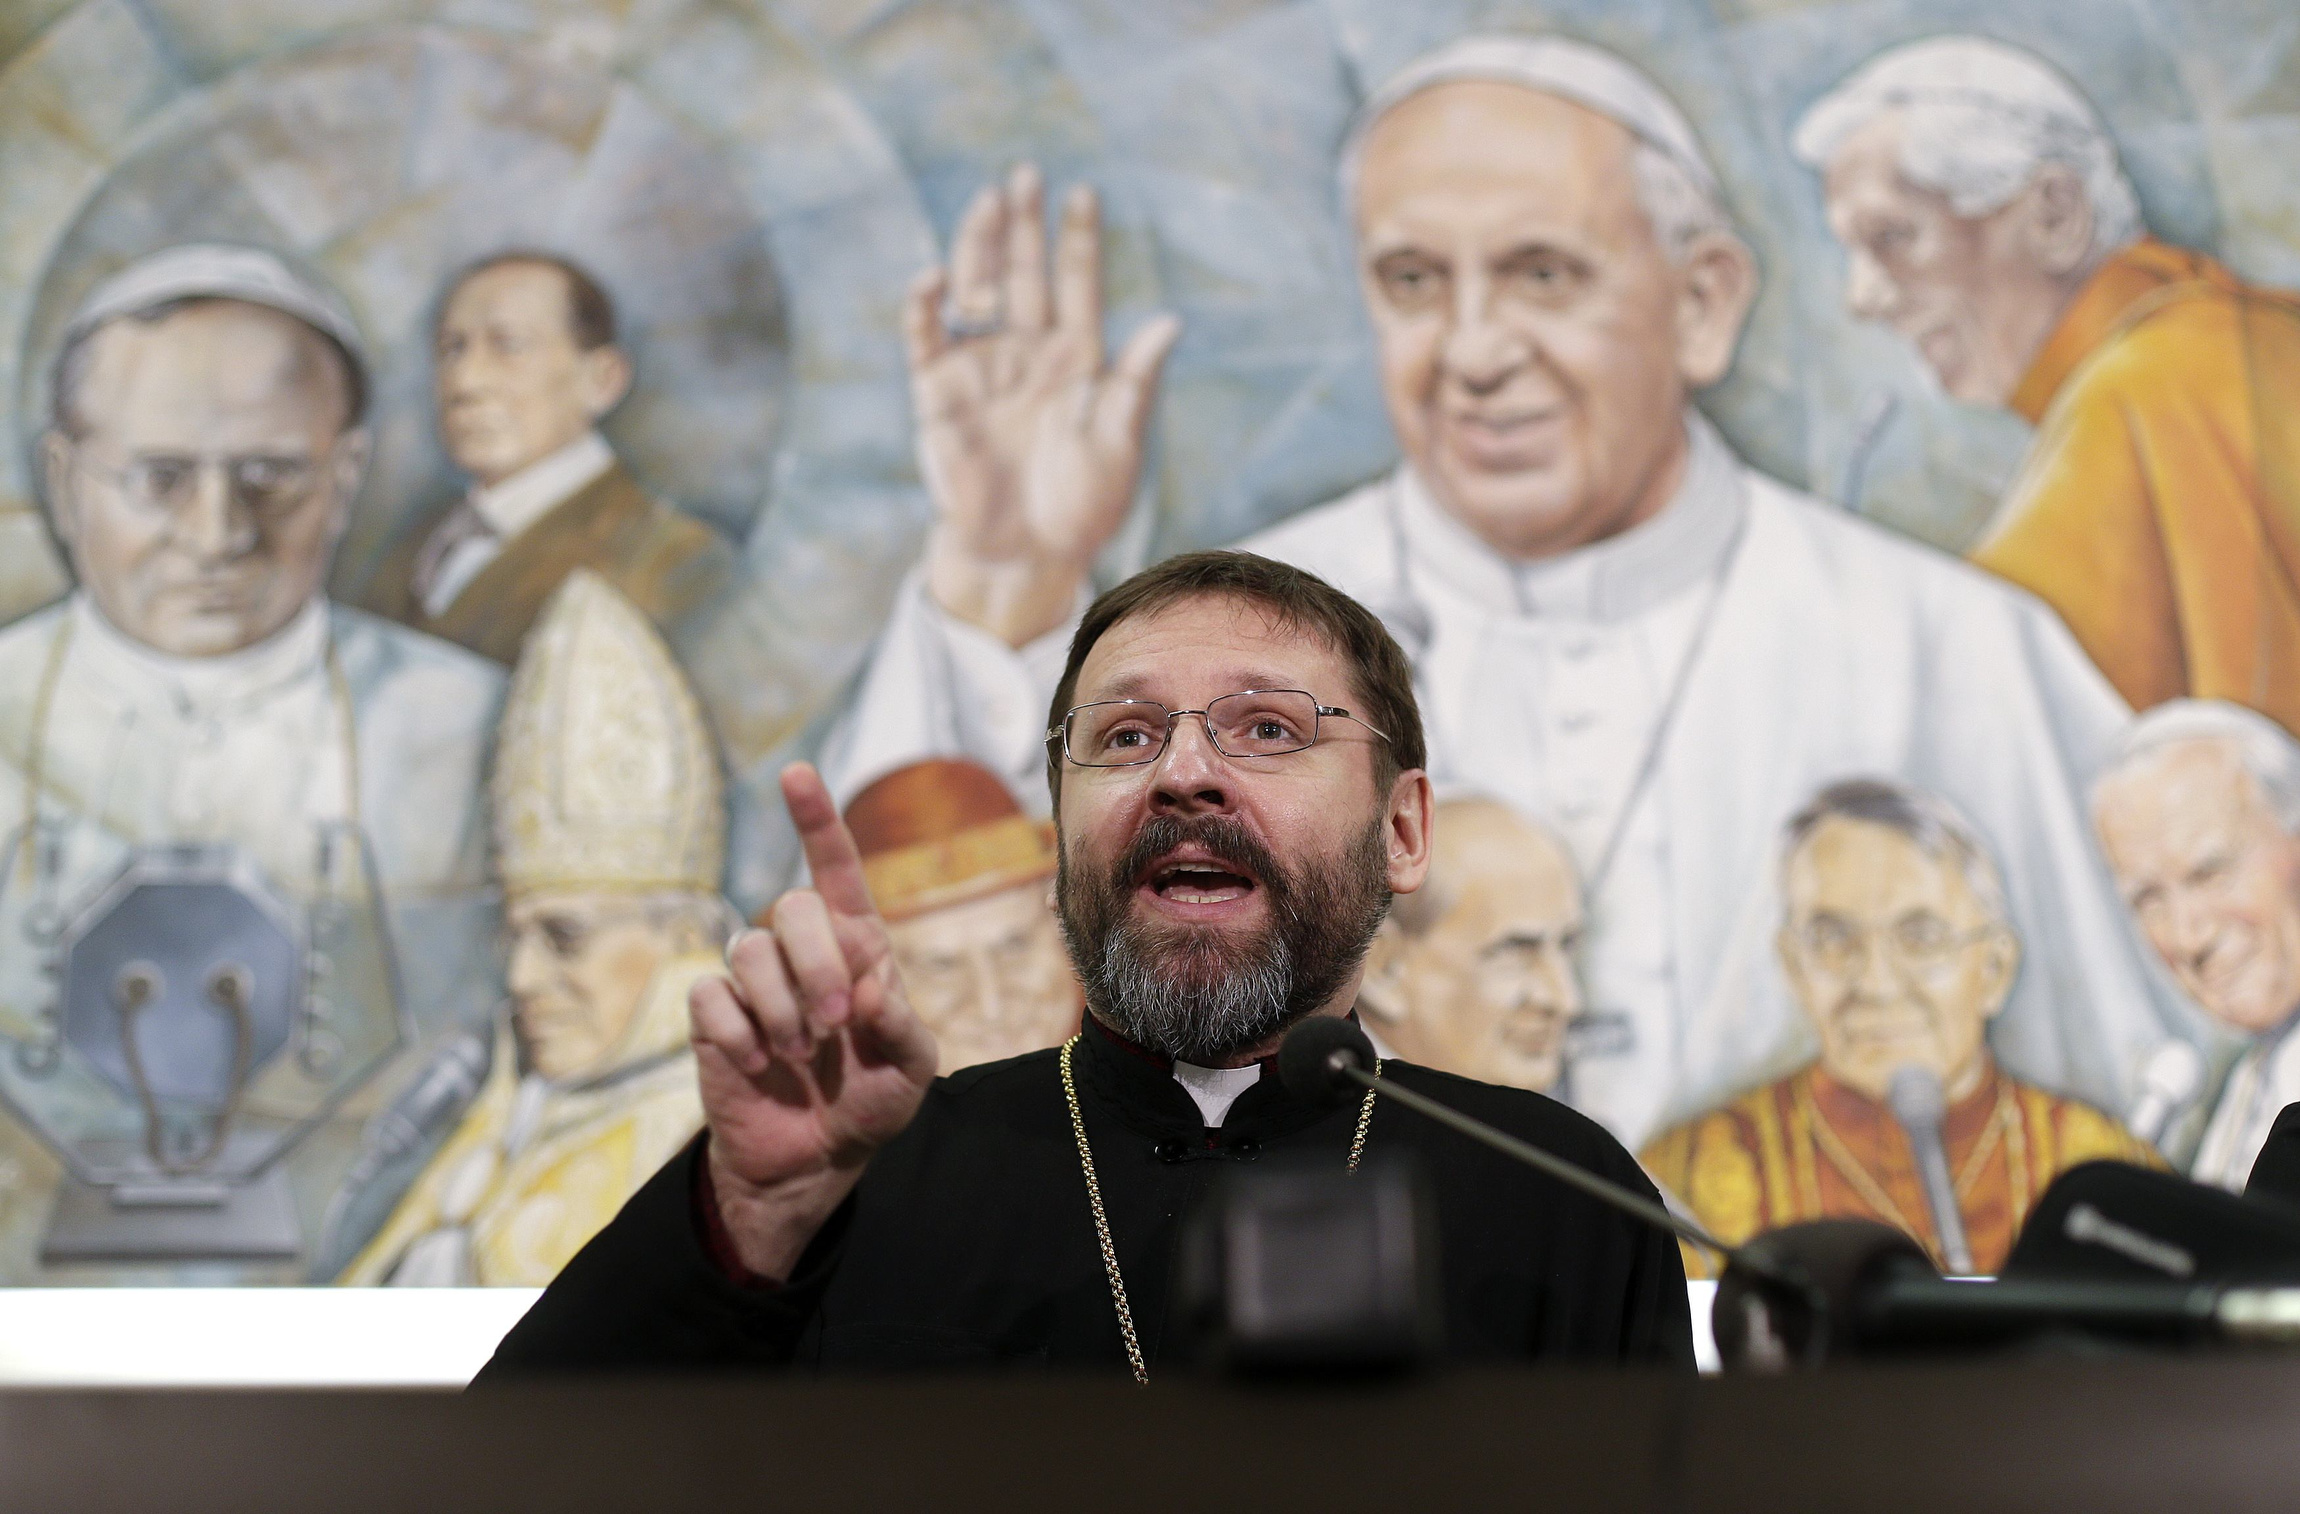 Archbishop Sviatoslav Shevchuk of Kiev-Halych, major archbishop of the Ukrainian Catholic Church, speaks Feb. 25 during a Rome news conference on the recent events in the Ukrainian capital. (CNS photo/Max Rossi, Reuters) (Feb. 25, 2014)